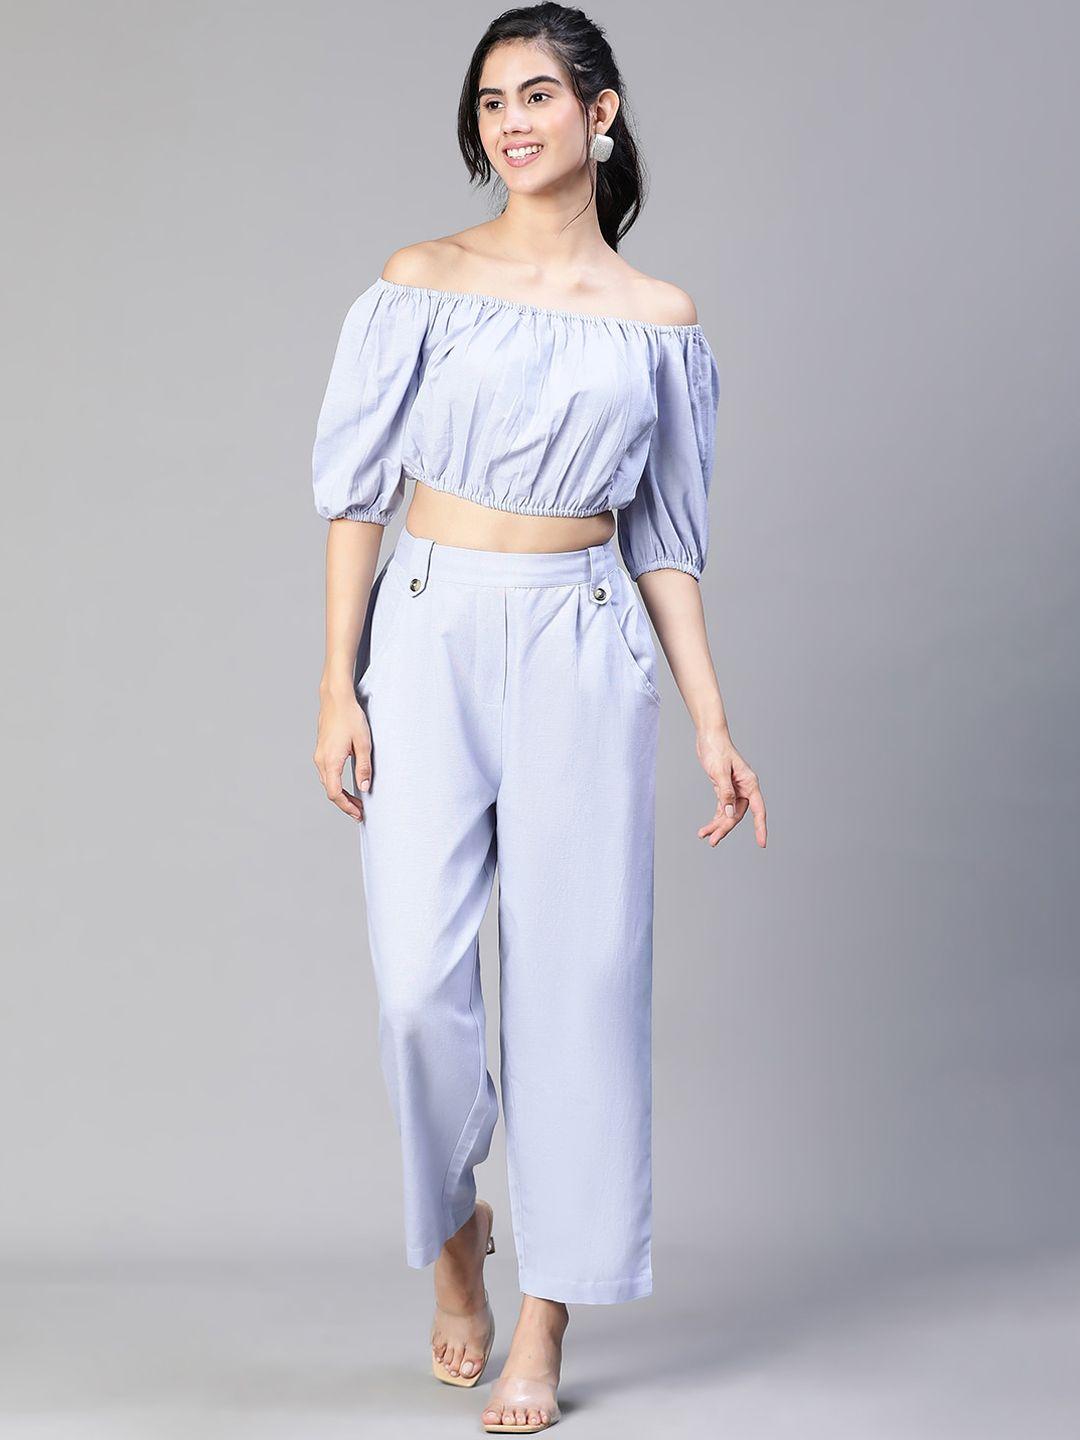 oxolloxo off-shoulder pure cotton top with trousers